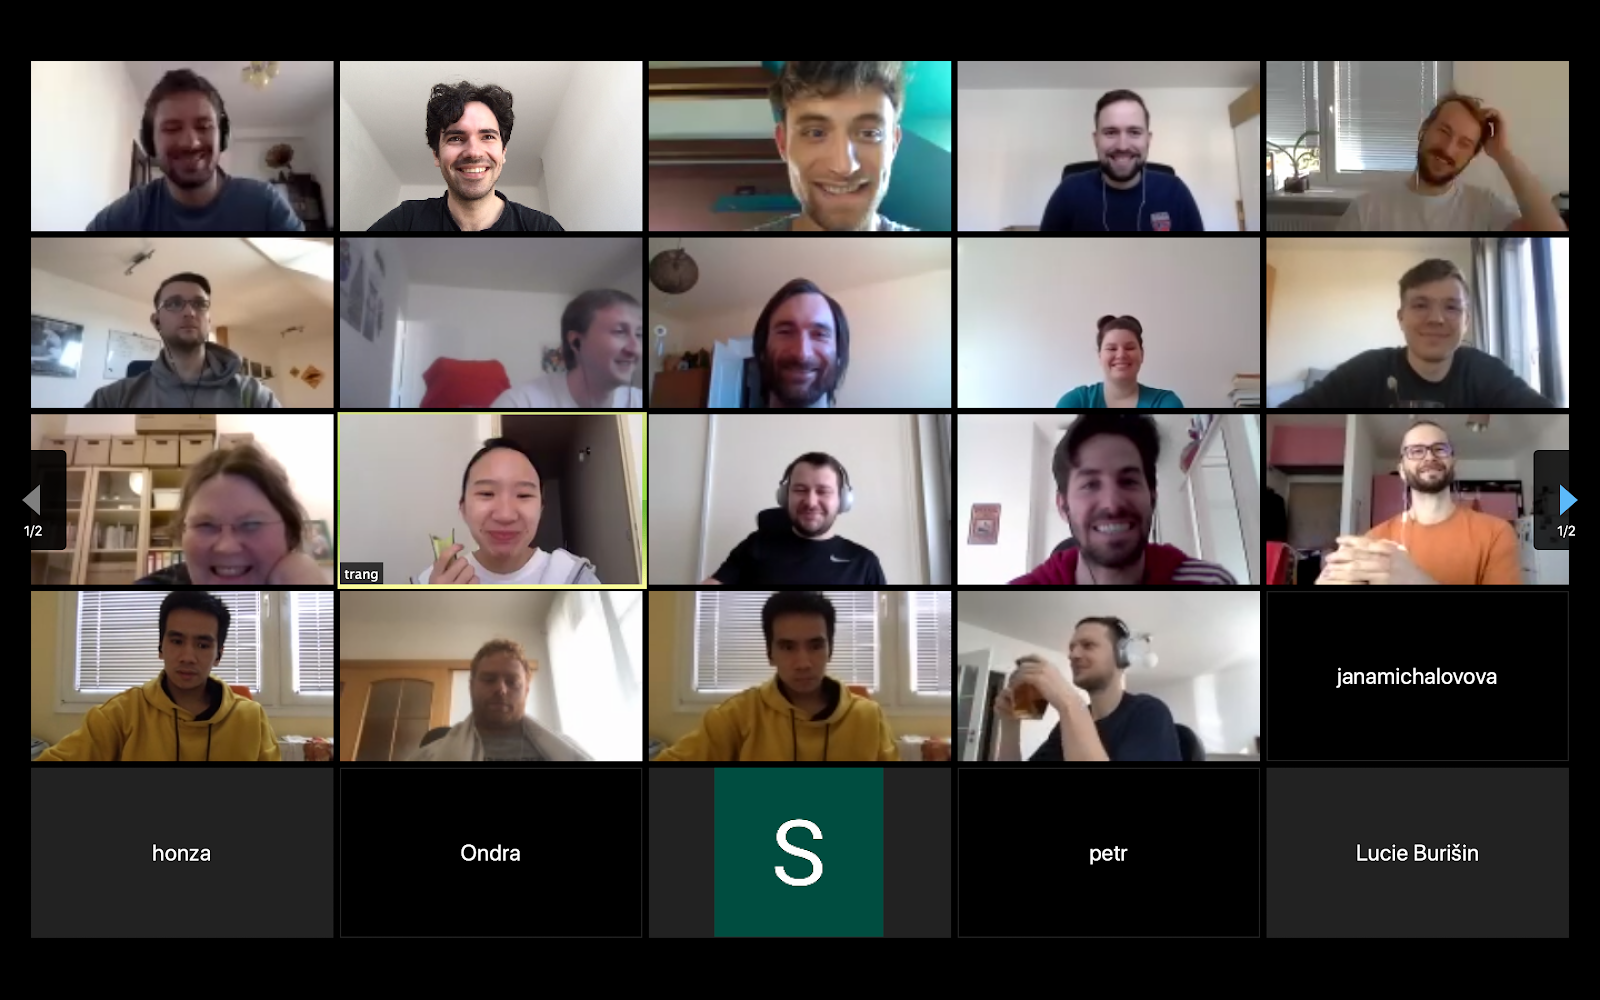 More than 25 apifiers in a zoom call with their cameras turned on.